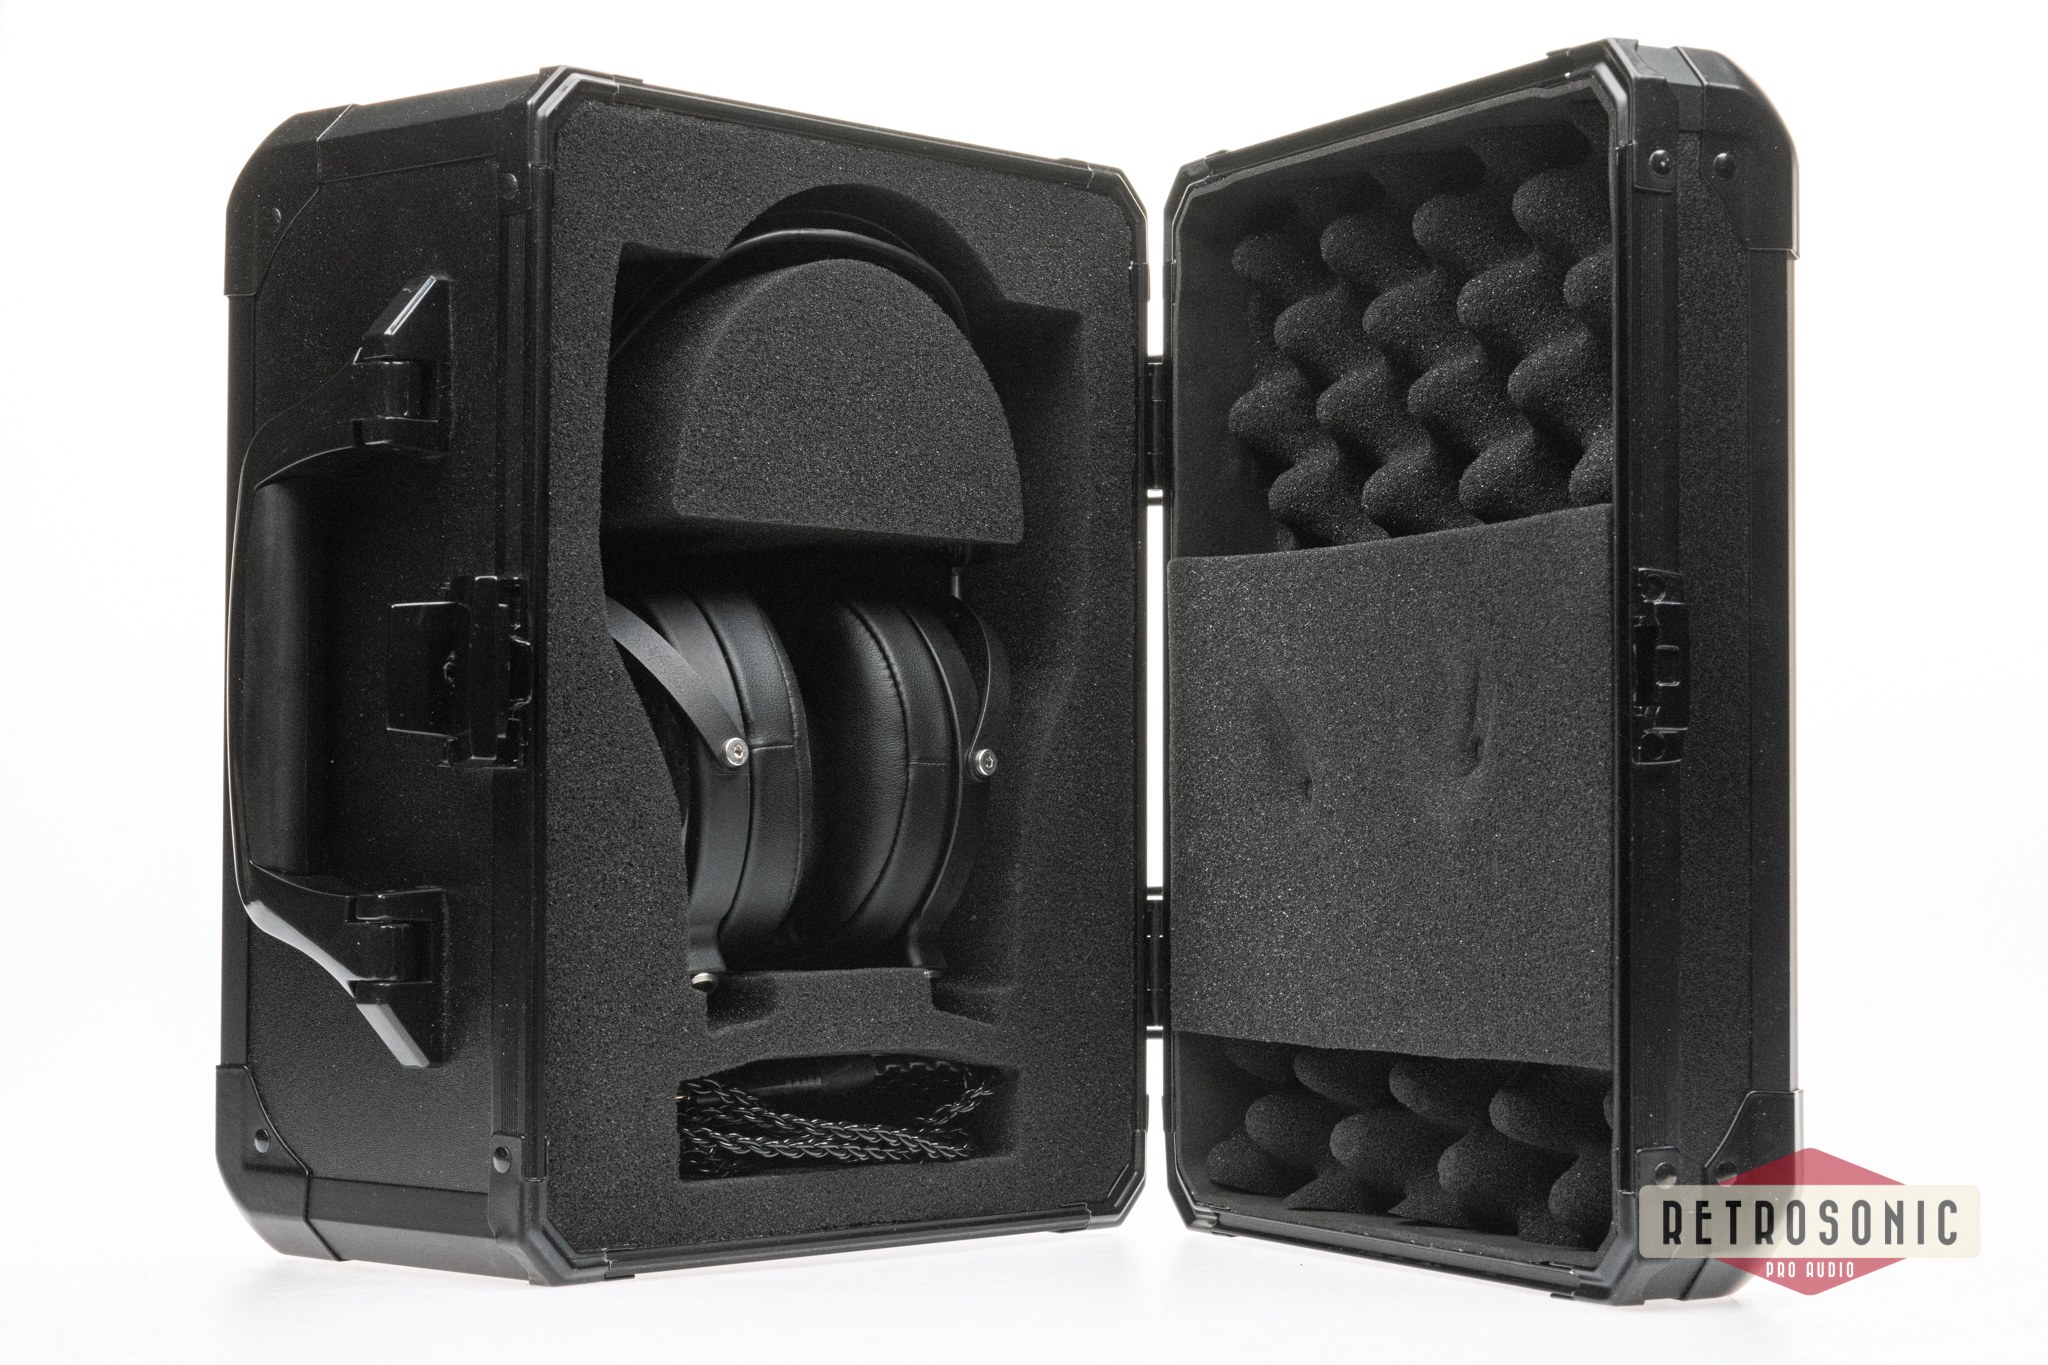 Audeze LCD2 Classic Closed Back w/economy carry case